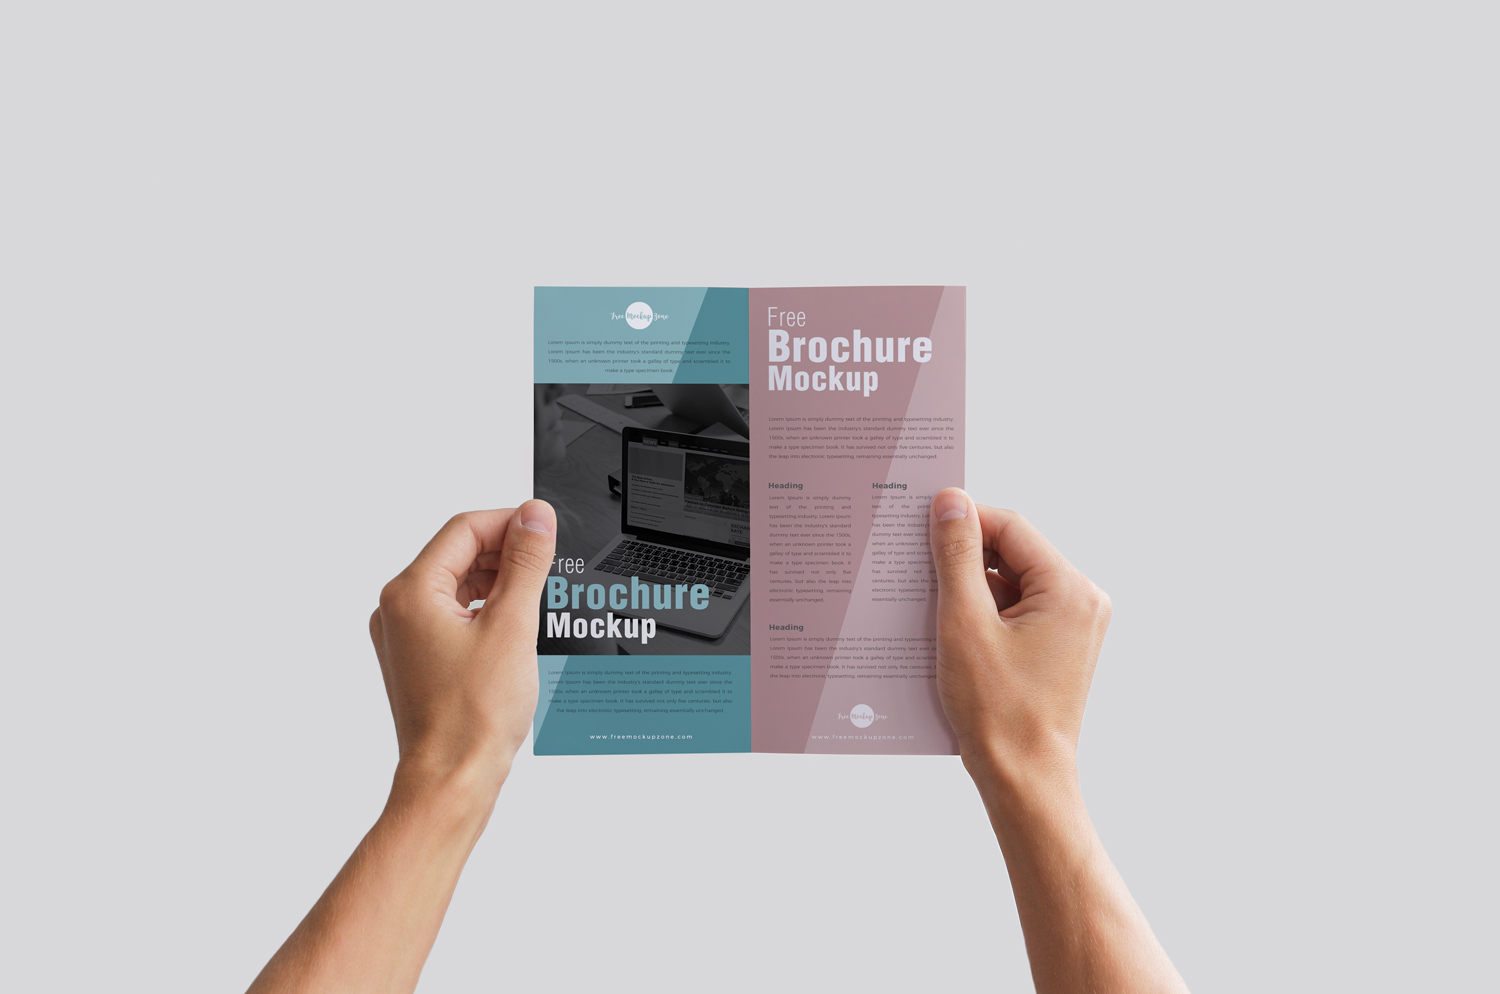 Free-Man-Holding-Brochure-in-Hands-Mockup-PSD